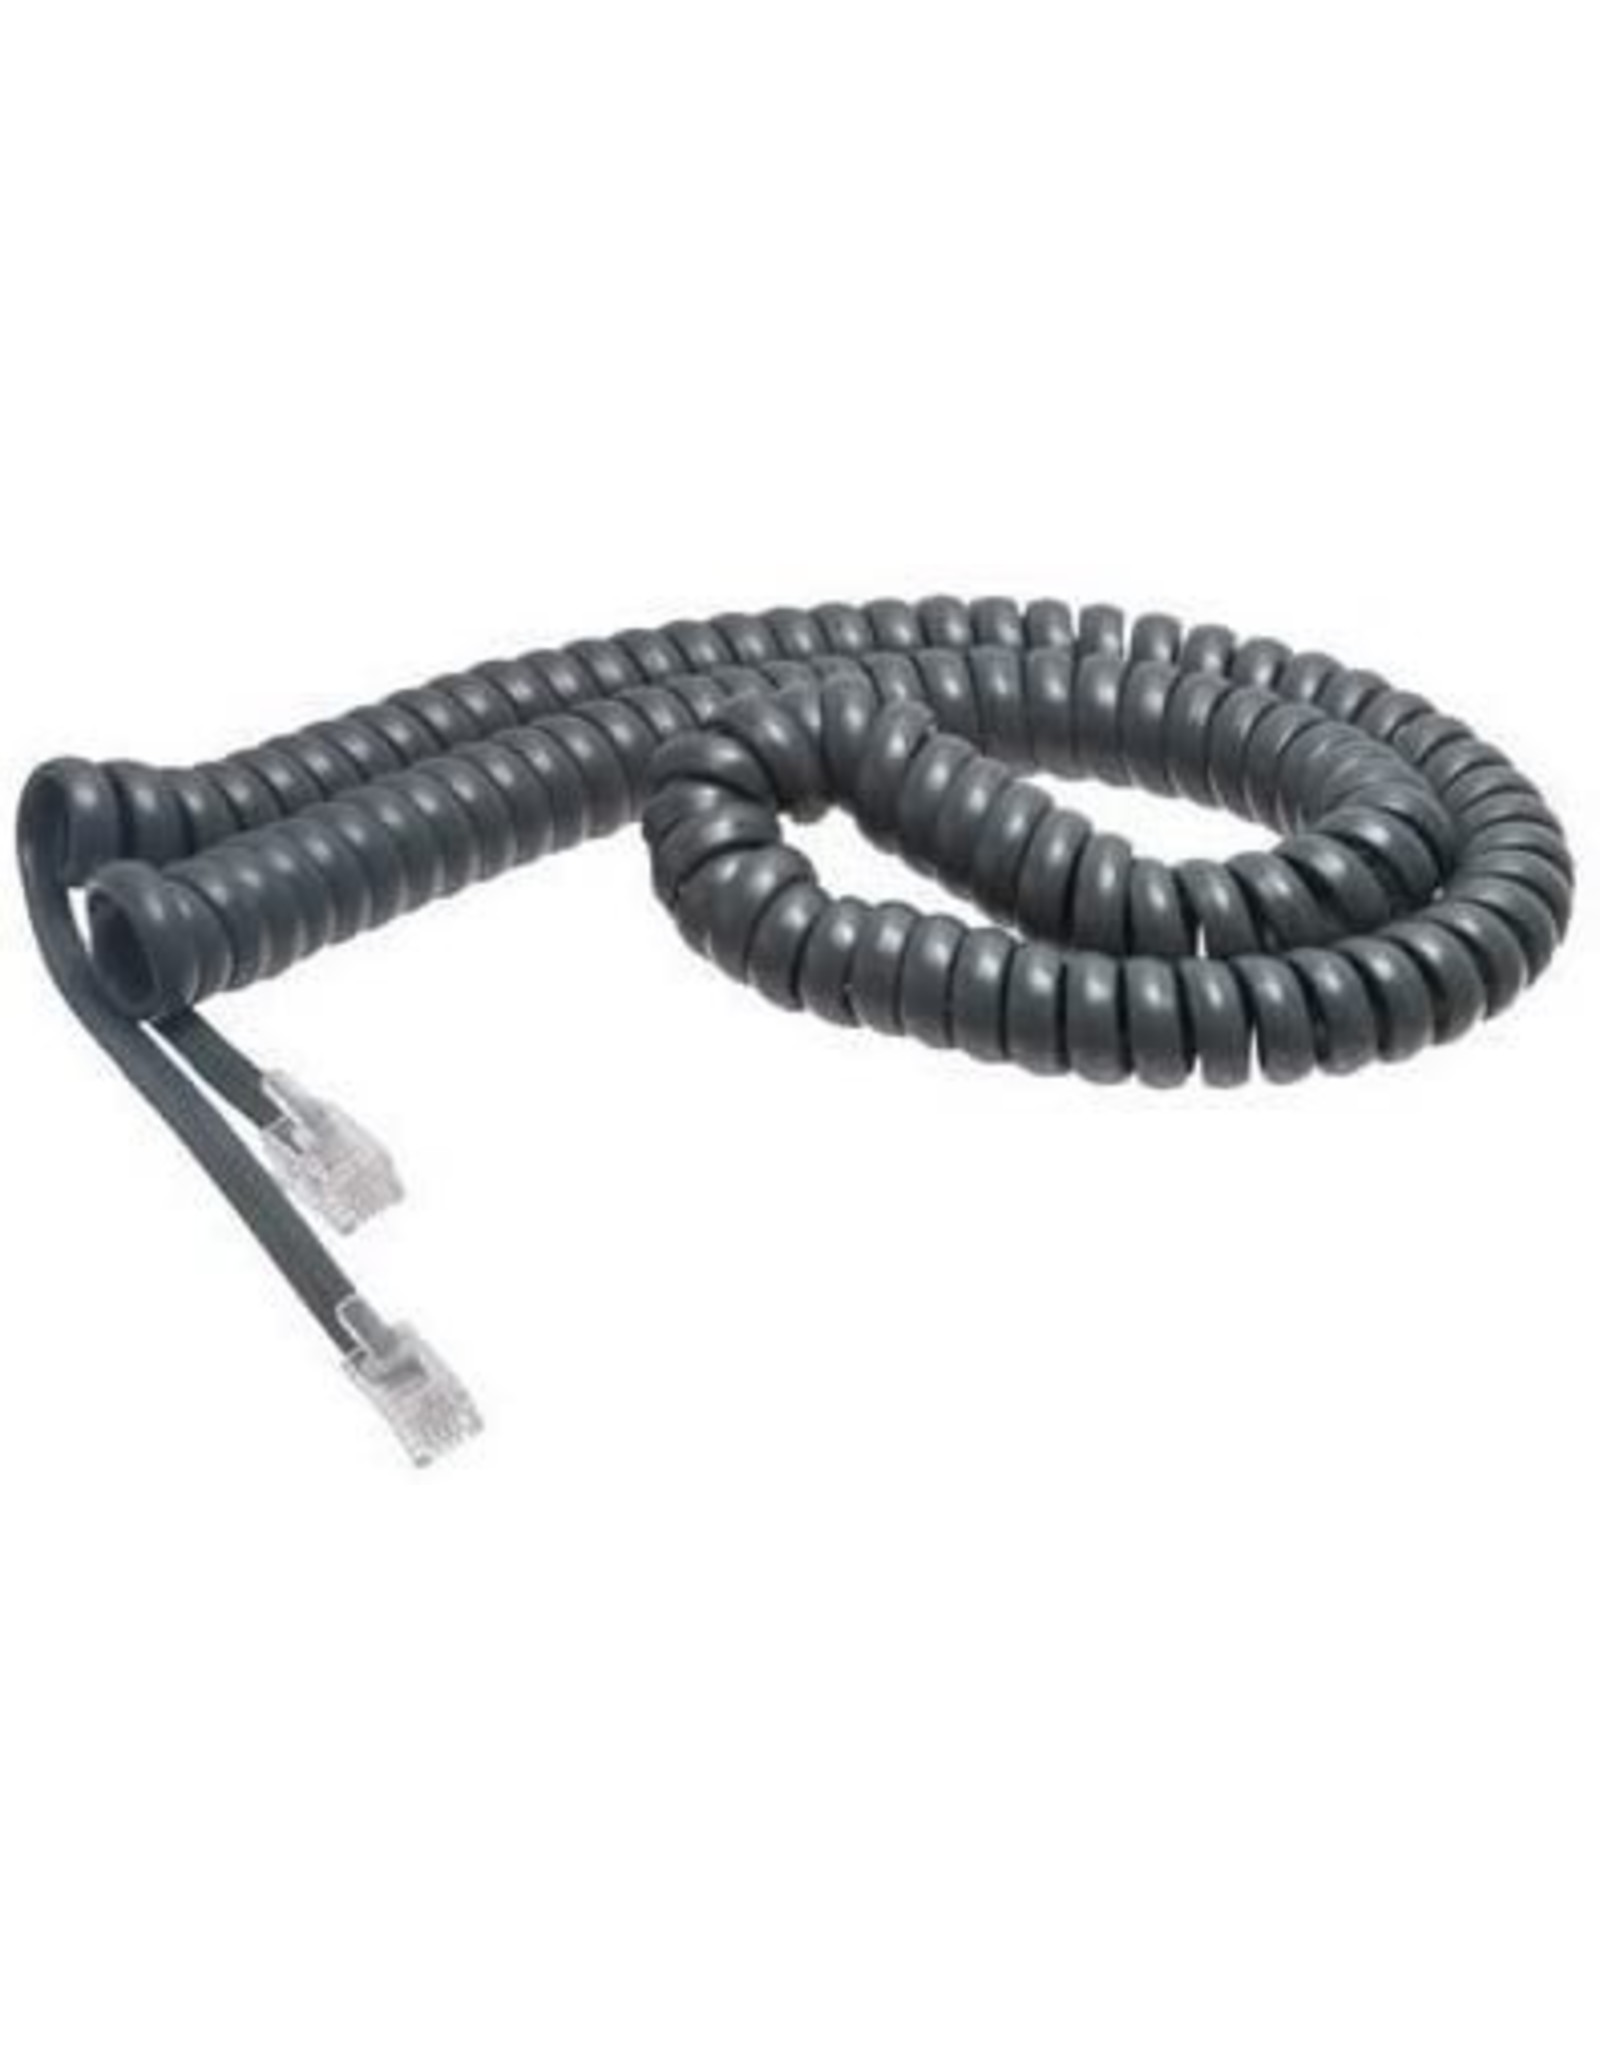 Cisco Inst. Cisco Handset Replacement Cable